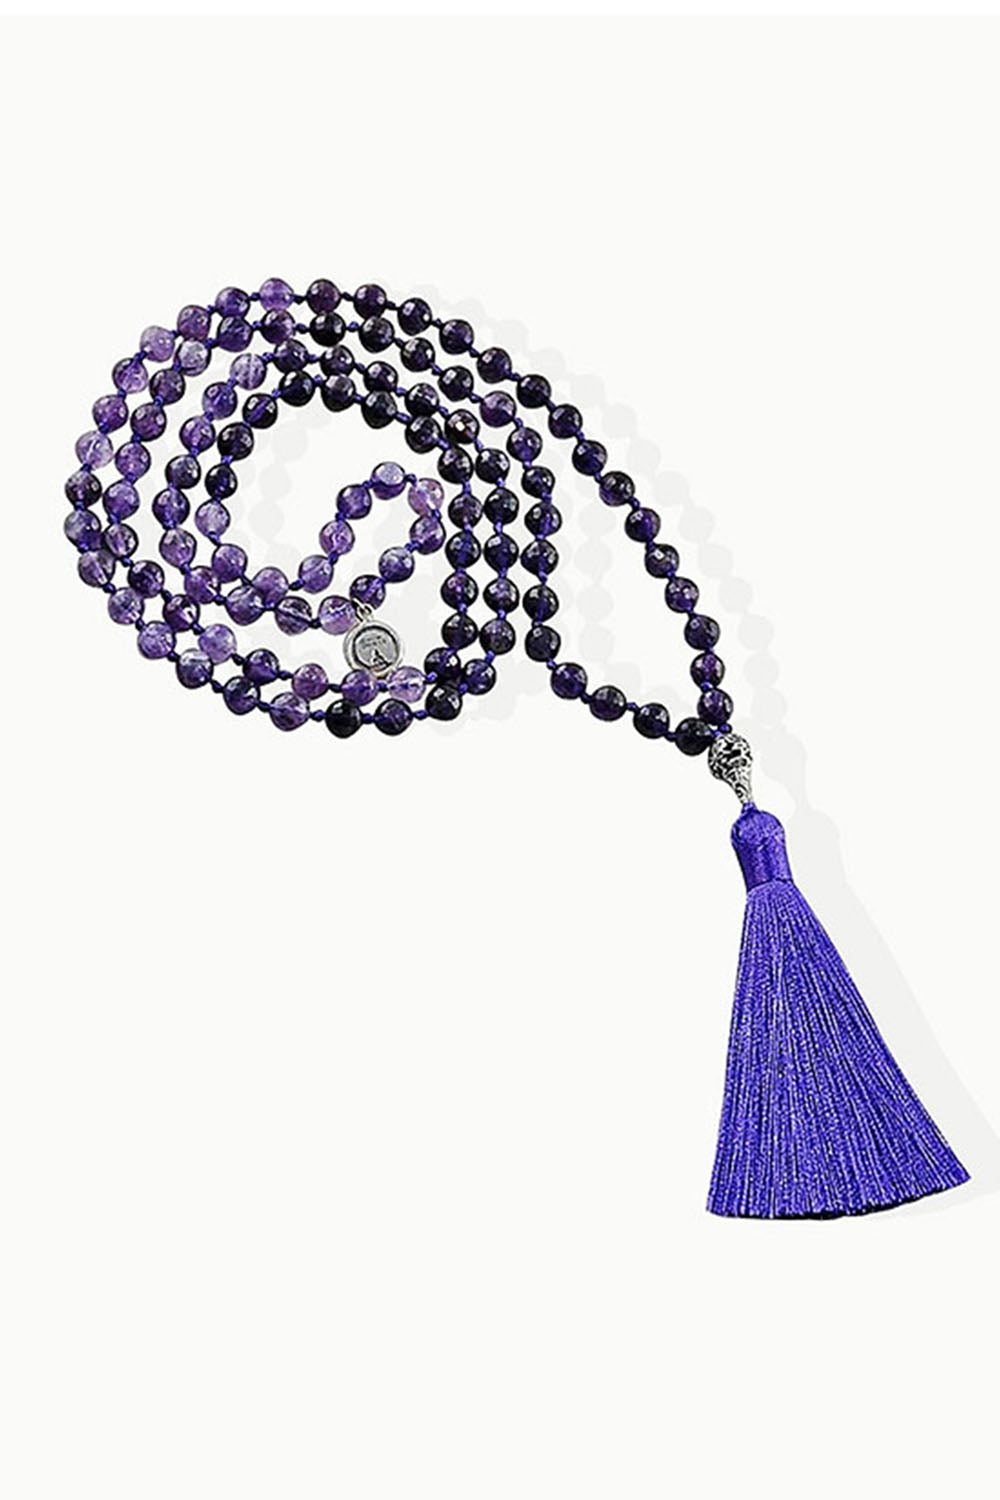 Sivalya Grounded in Peace Amethyst Mala